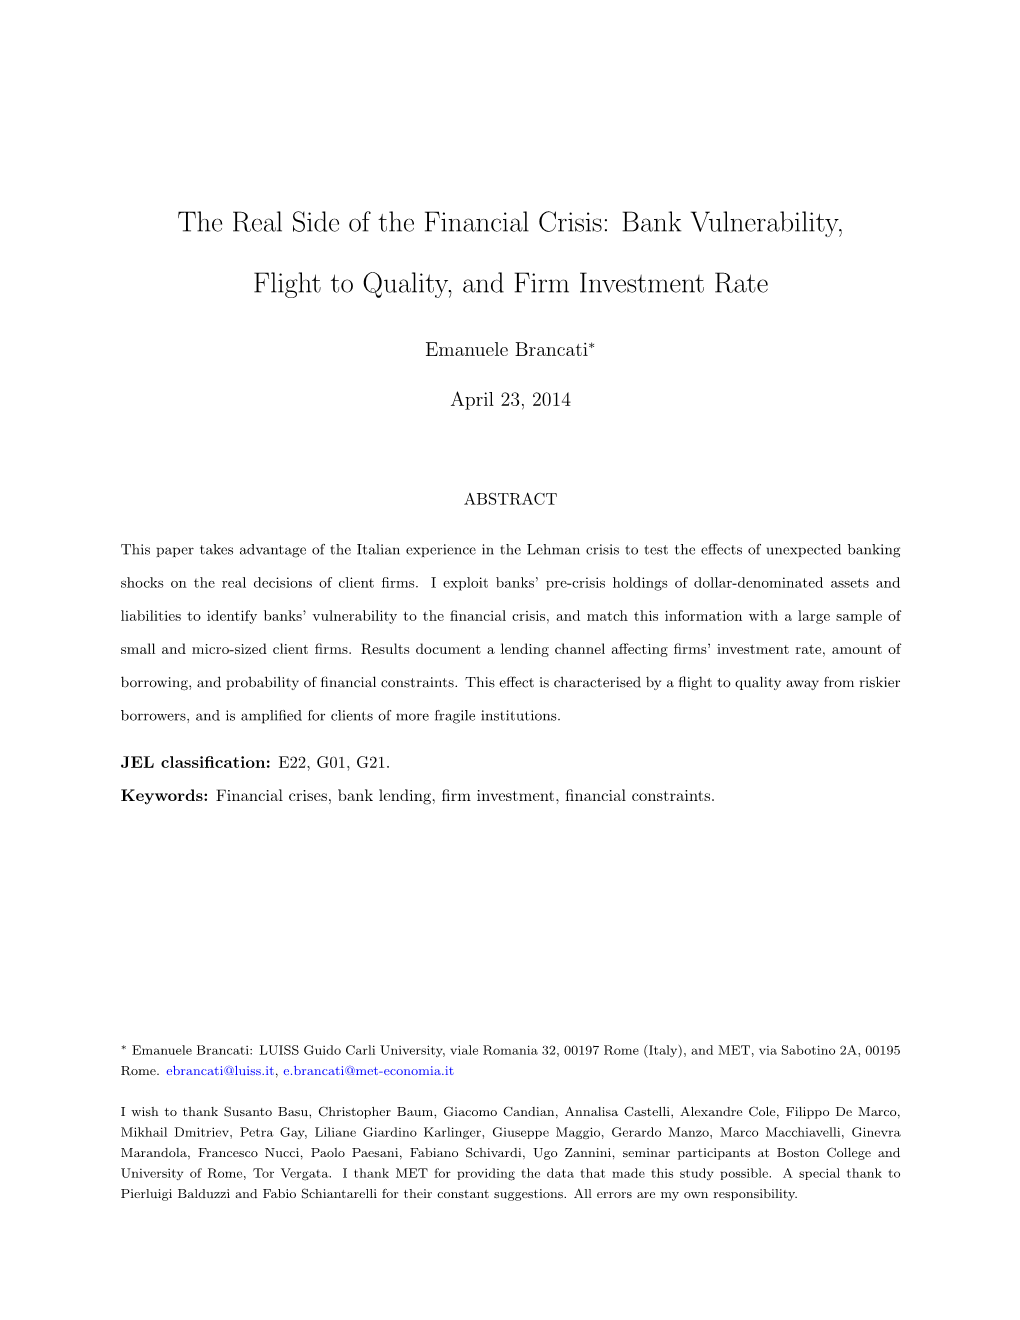 The Real Side of the Financial Crisis: Bank Vulnerability, Flight to Quality